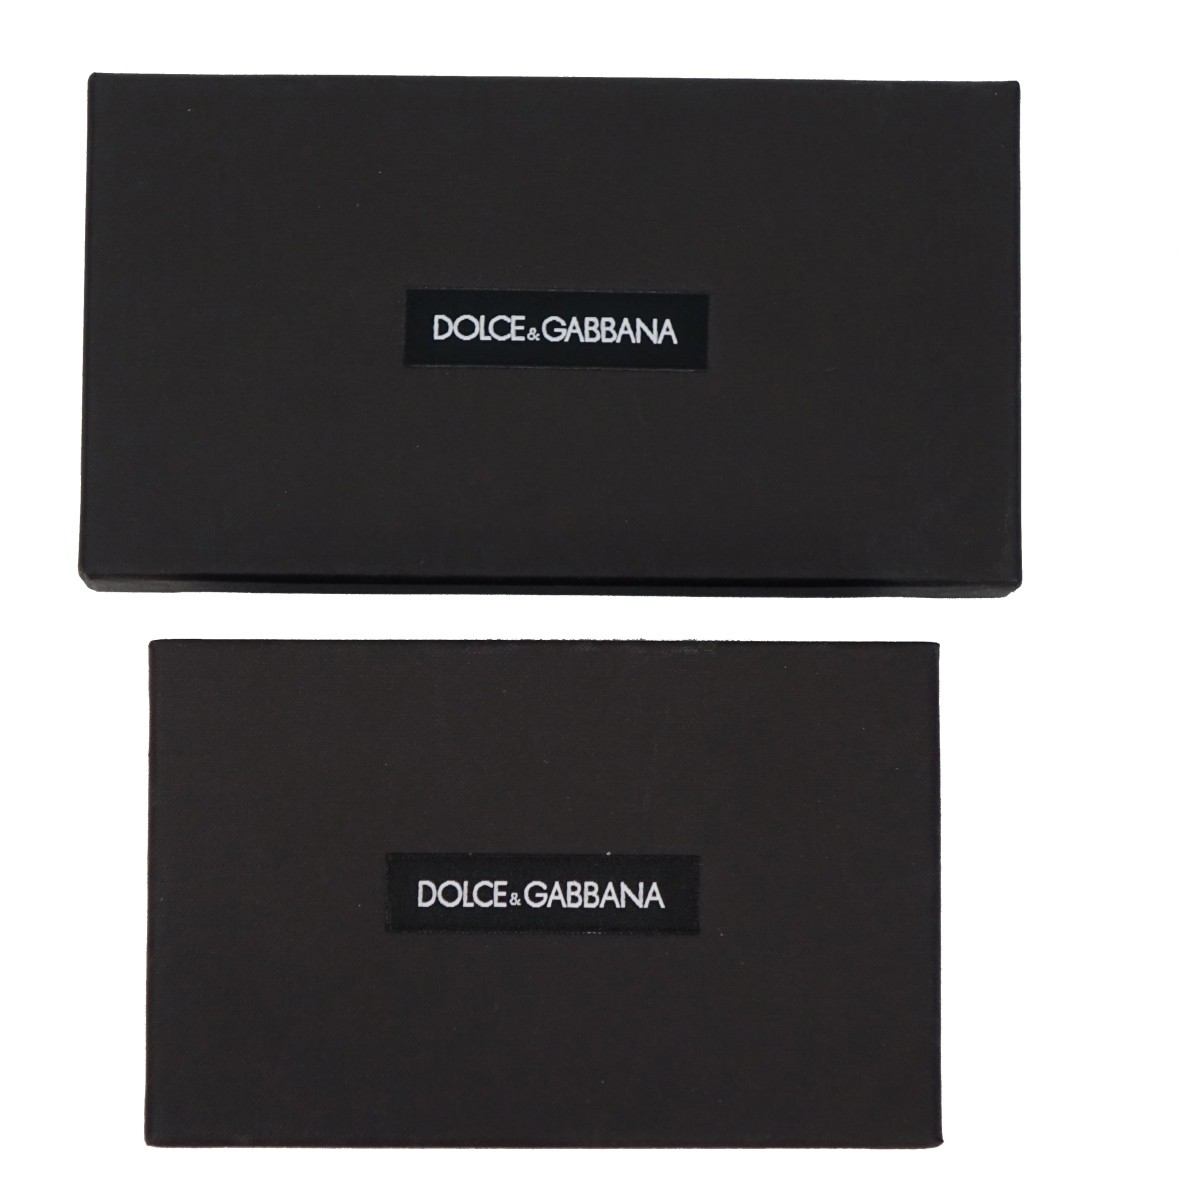 Dolce & Gabbana Iphone 11 and Airpods Cases | Kodner Auctions